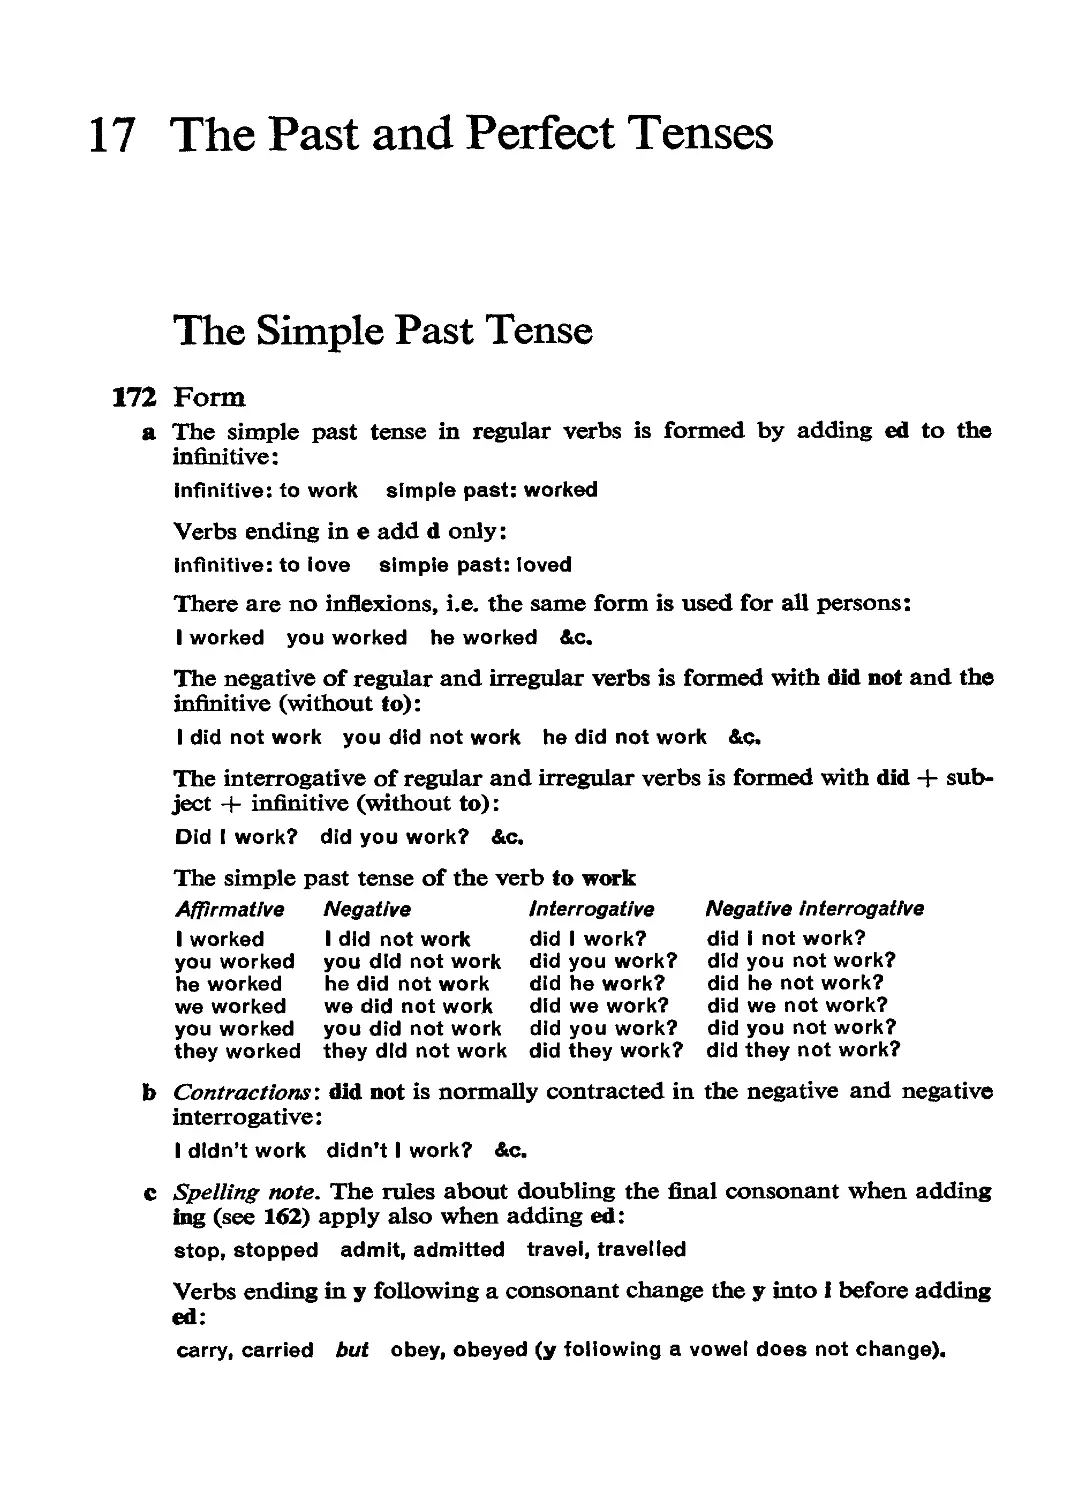 The Past and Perfect Tenses